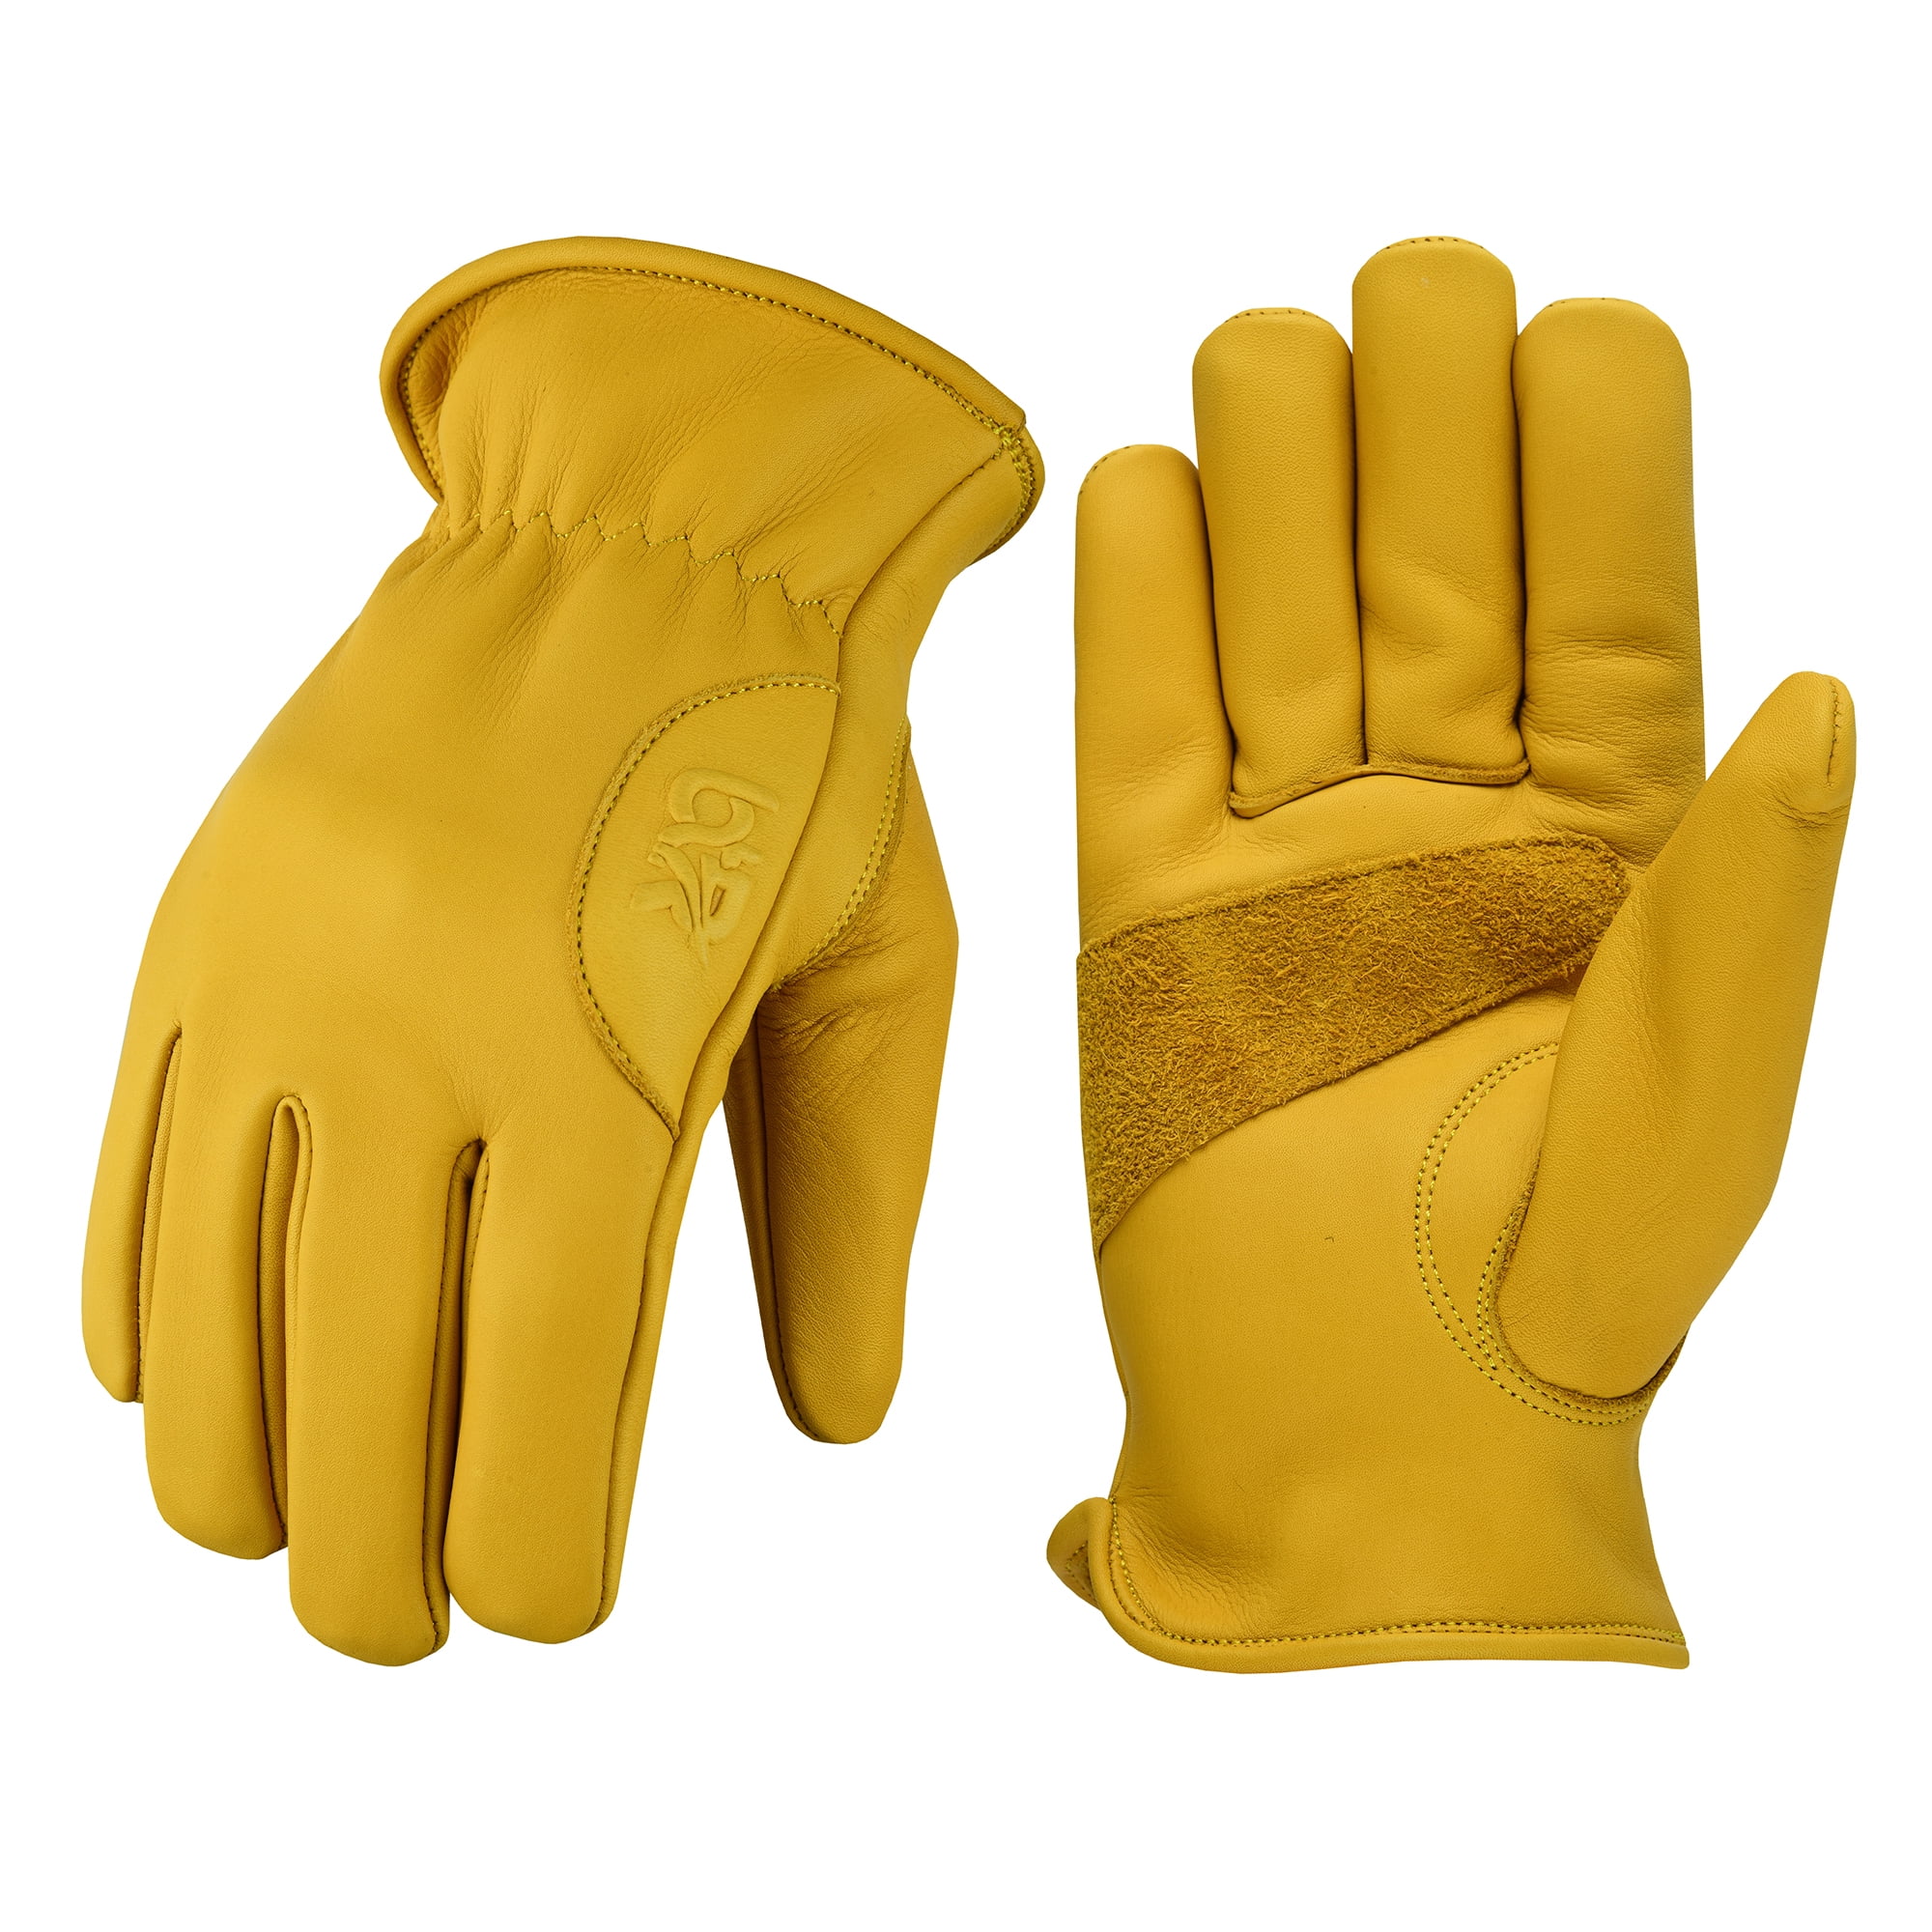 Cowhide Work Safety Gloves, Gardening, Thorn Resistance, Mechanic Work,  Palm Padded, Knuckle TPR Anti-Impact Protect, Screen Touch Fingers,  Multi-Purpose, size XXL 